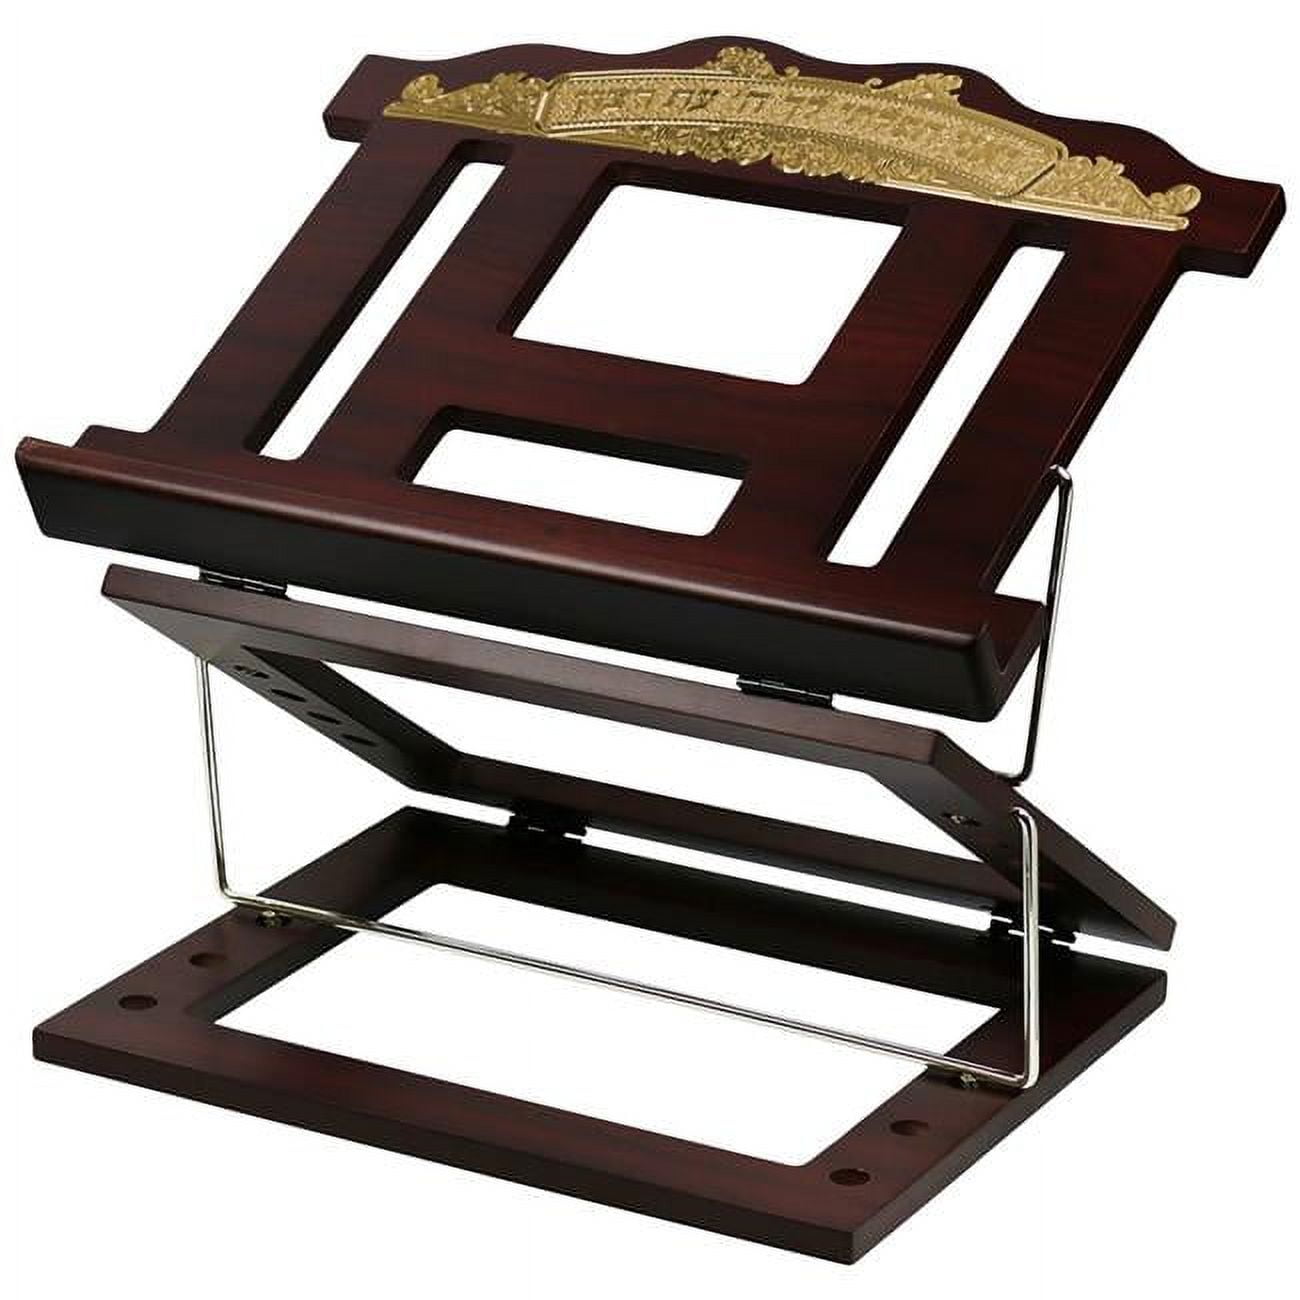 Picture of Nua 58364-1 15 x 12 in. Wooden 2 Tone Book Stand & 2 Position Shtender with Gold Plate